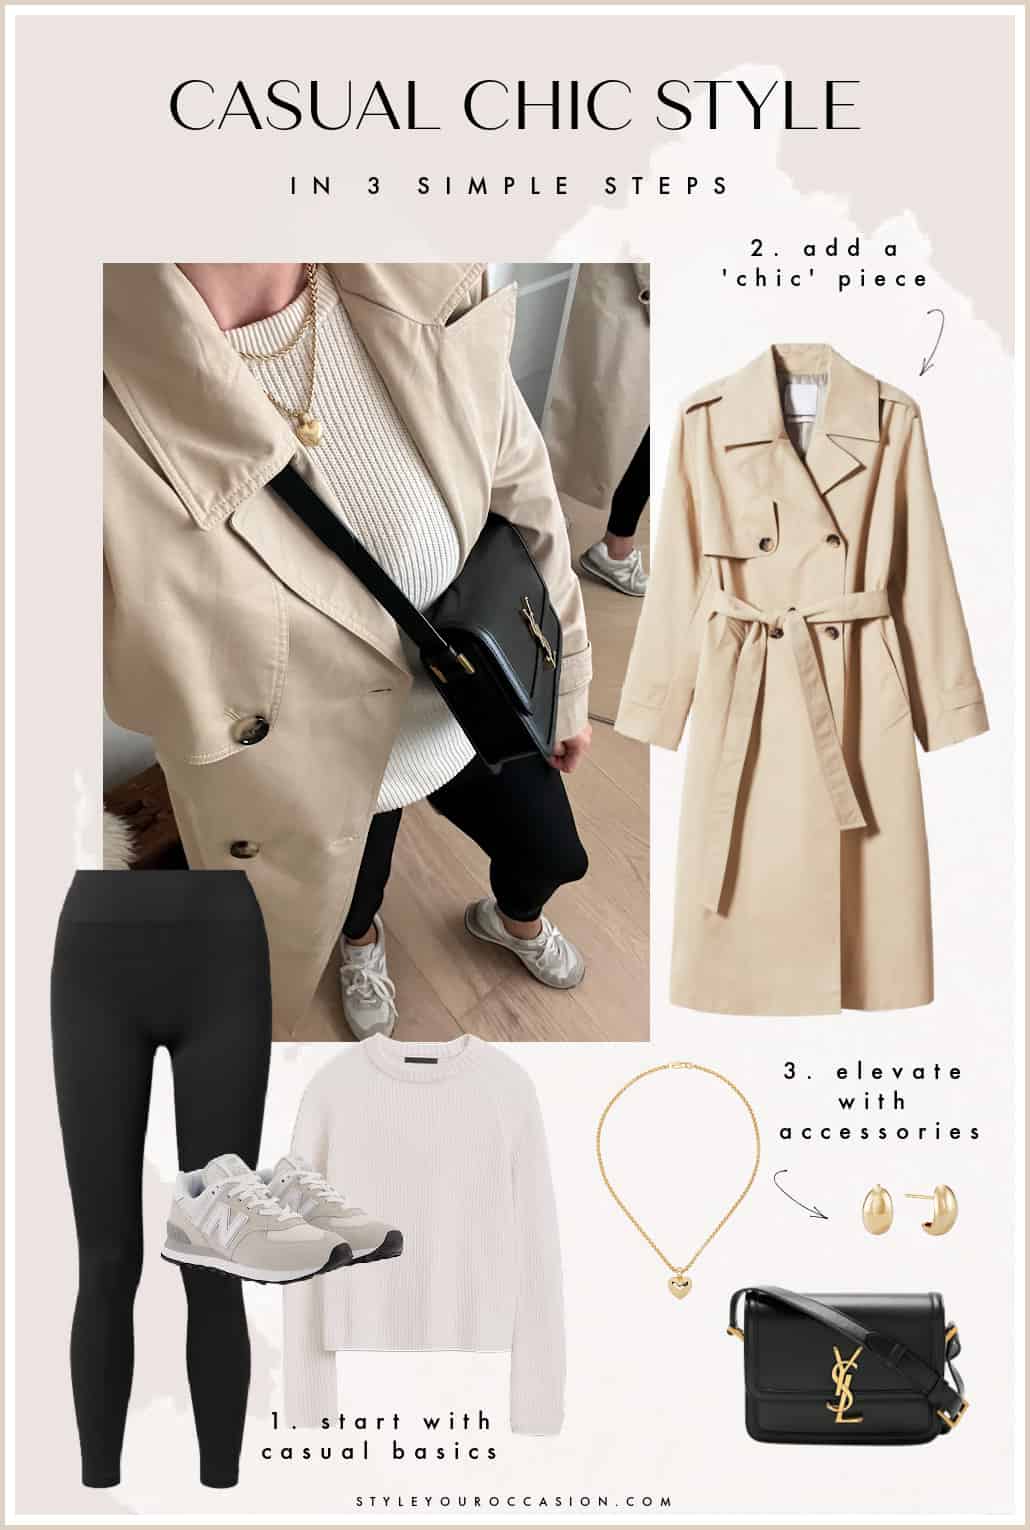 An image board of a woman wearing a beige trench coat with black leggings, neutral trainers, and a black handbag using these fashion pieces to describe the three simple steps to create a casual chic style